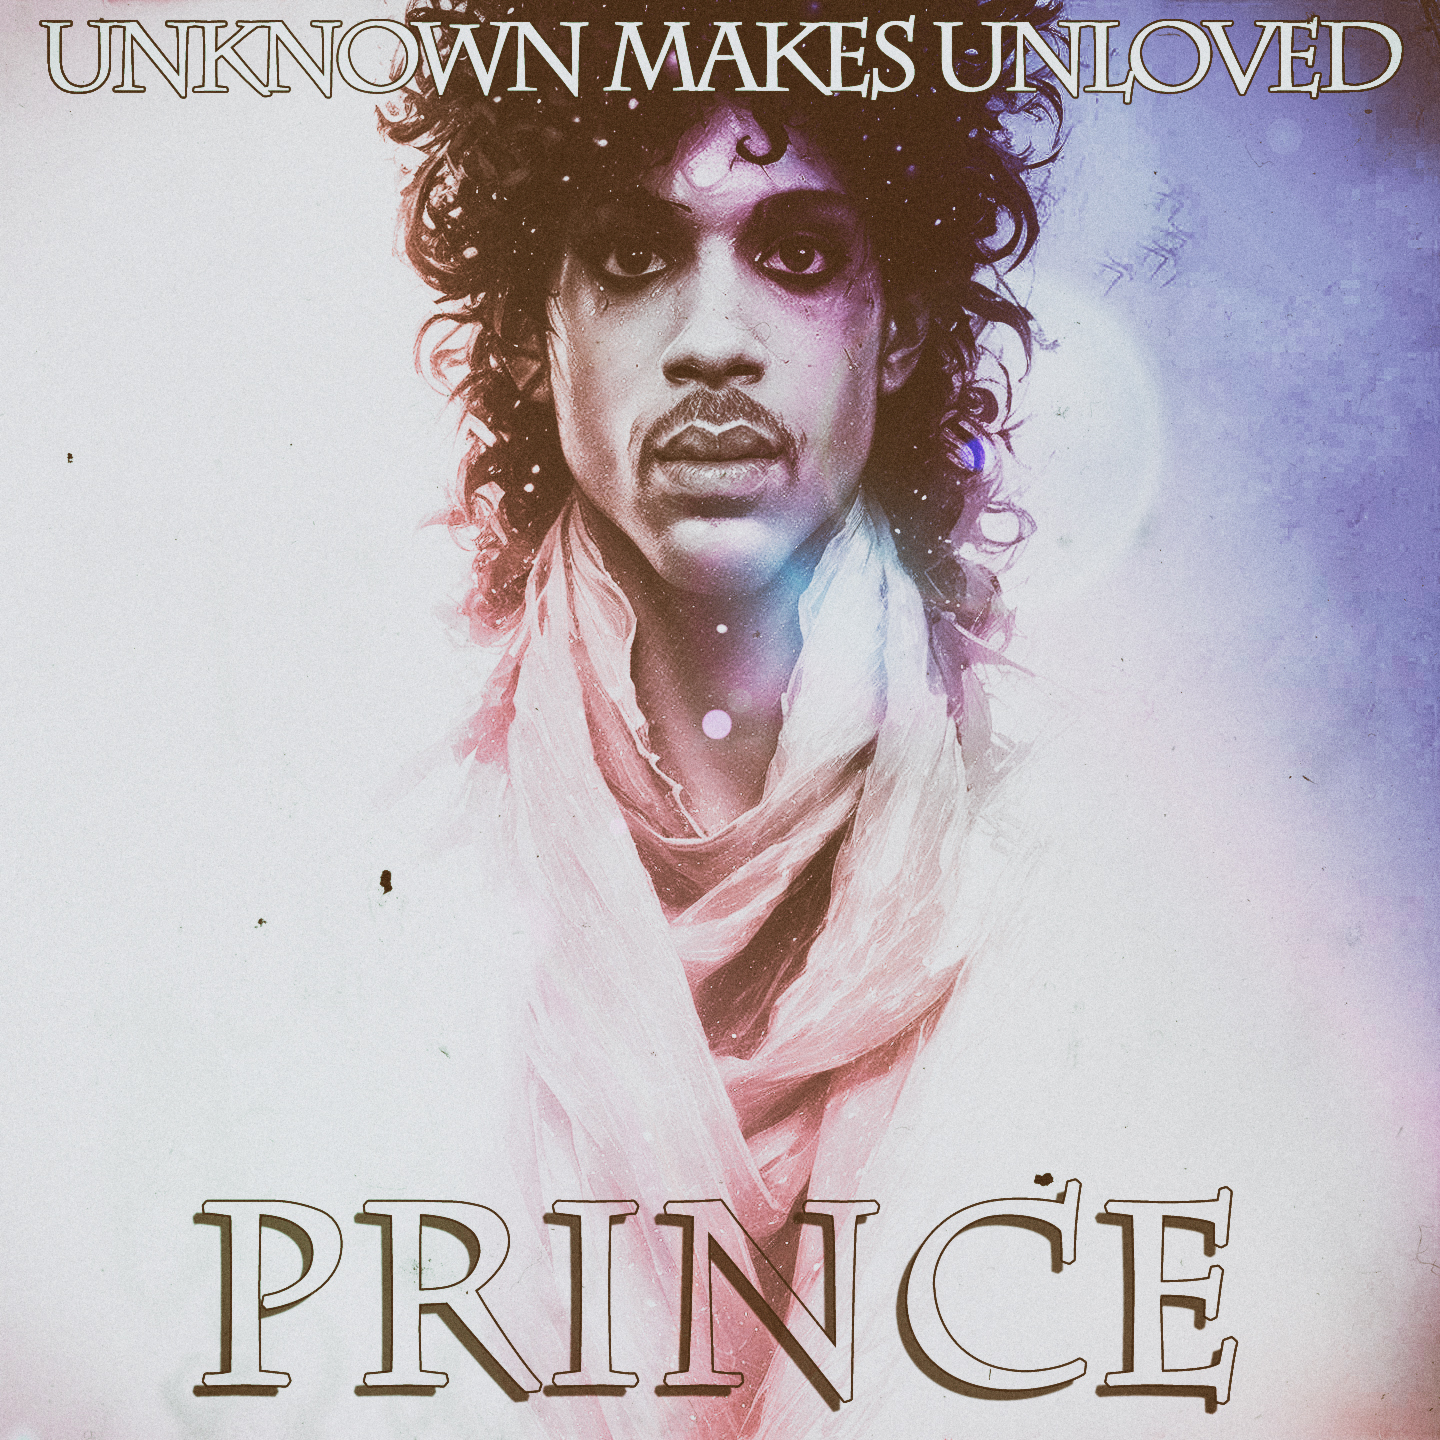 Prince - Unkown Makes Unloved